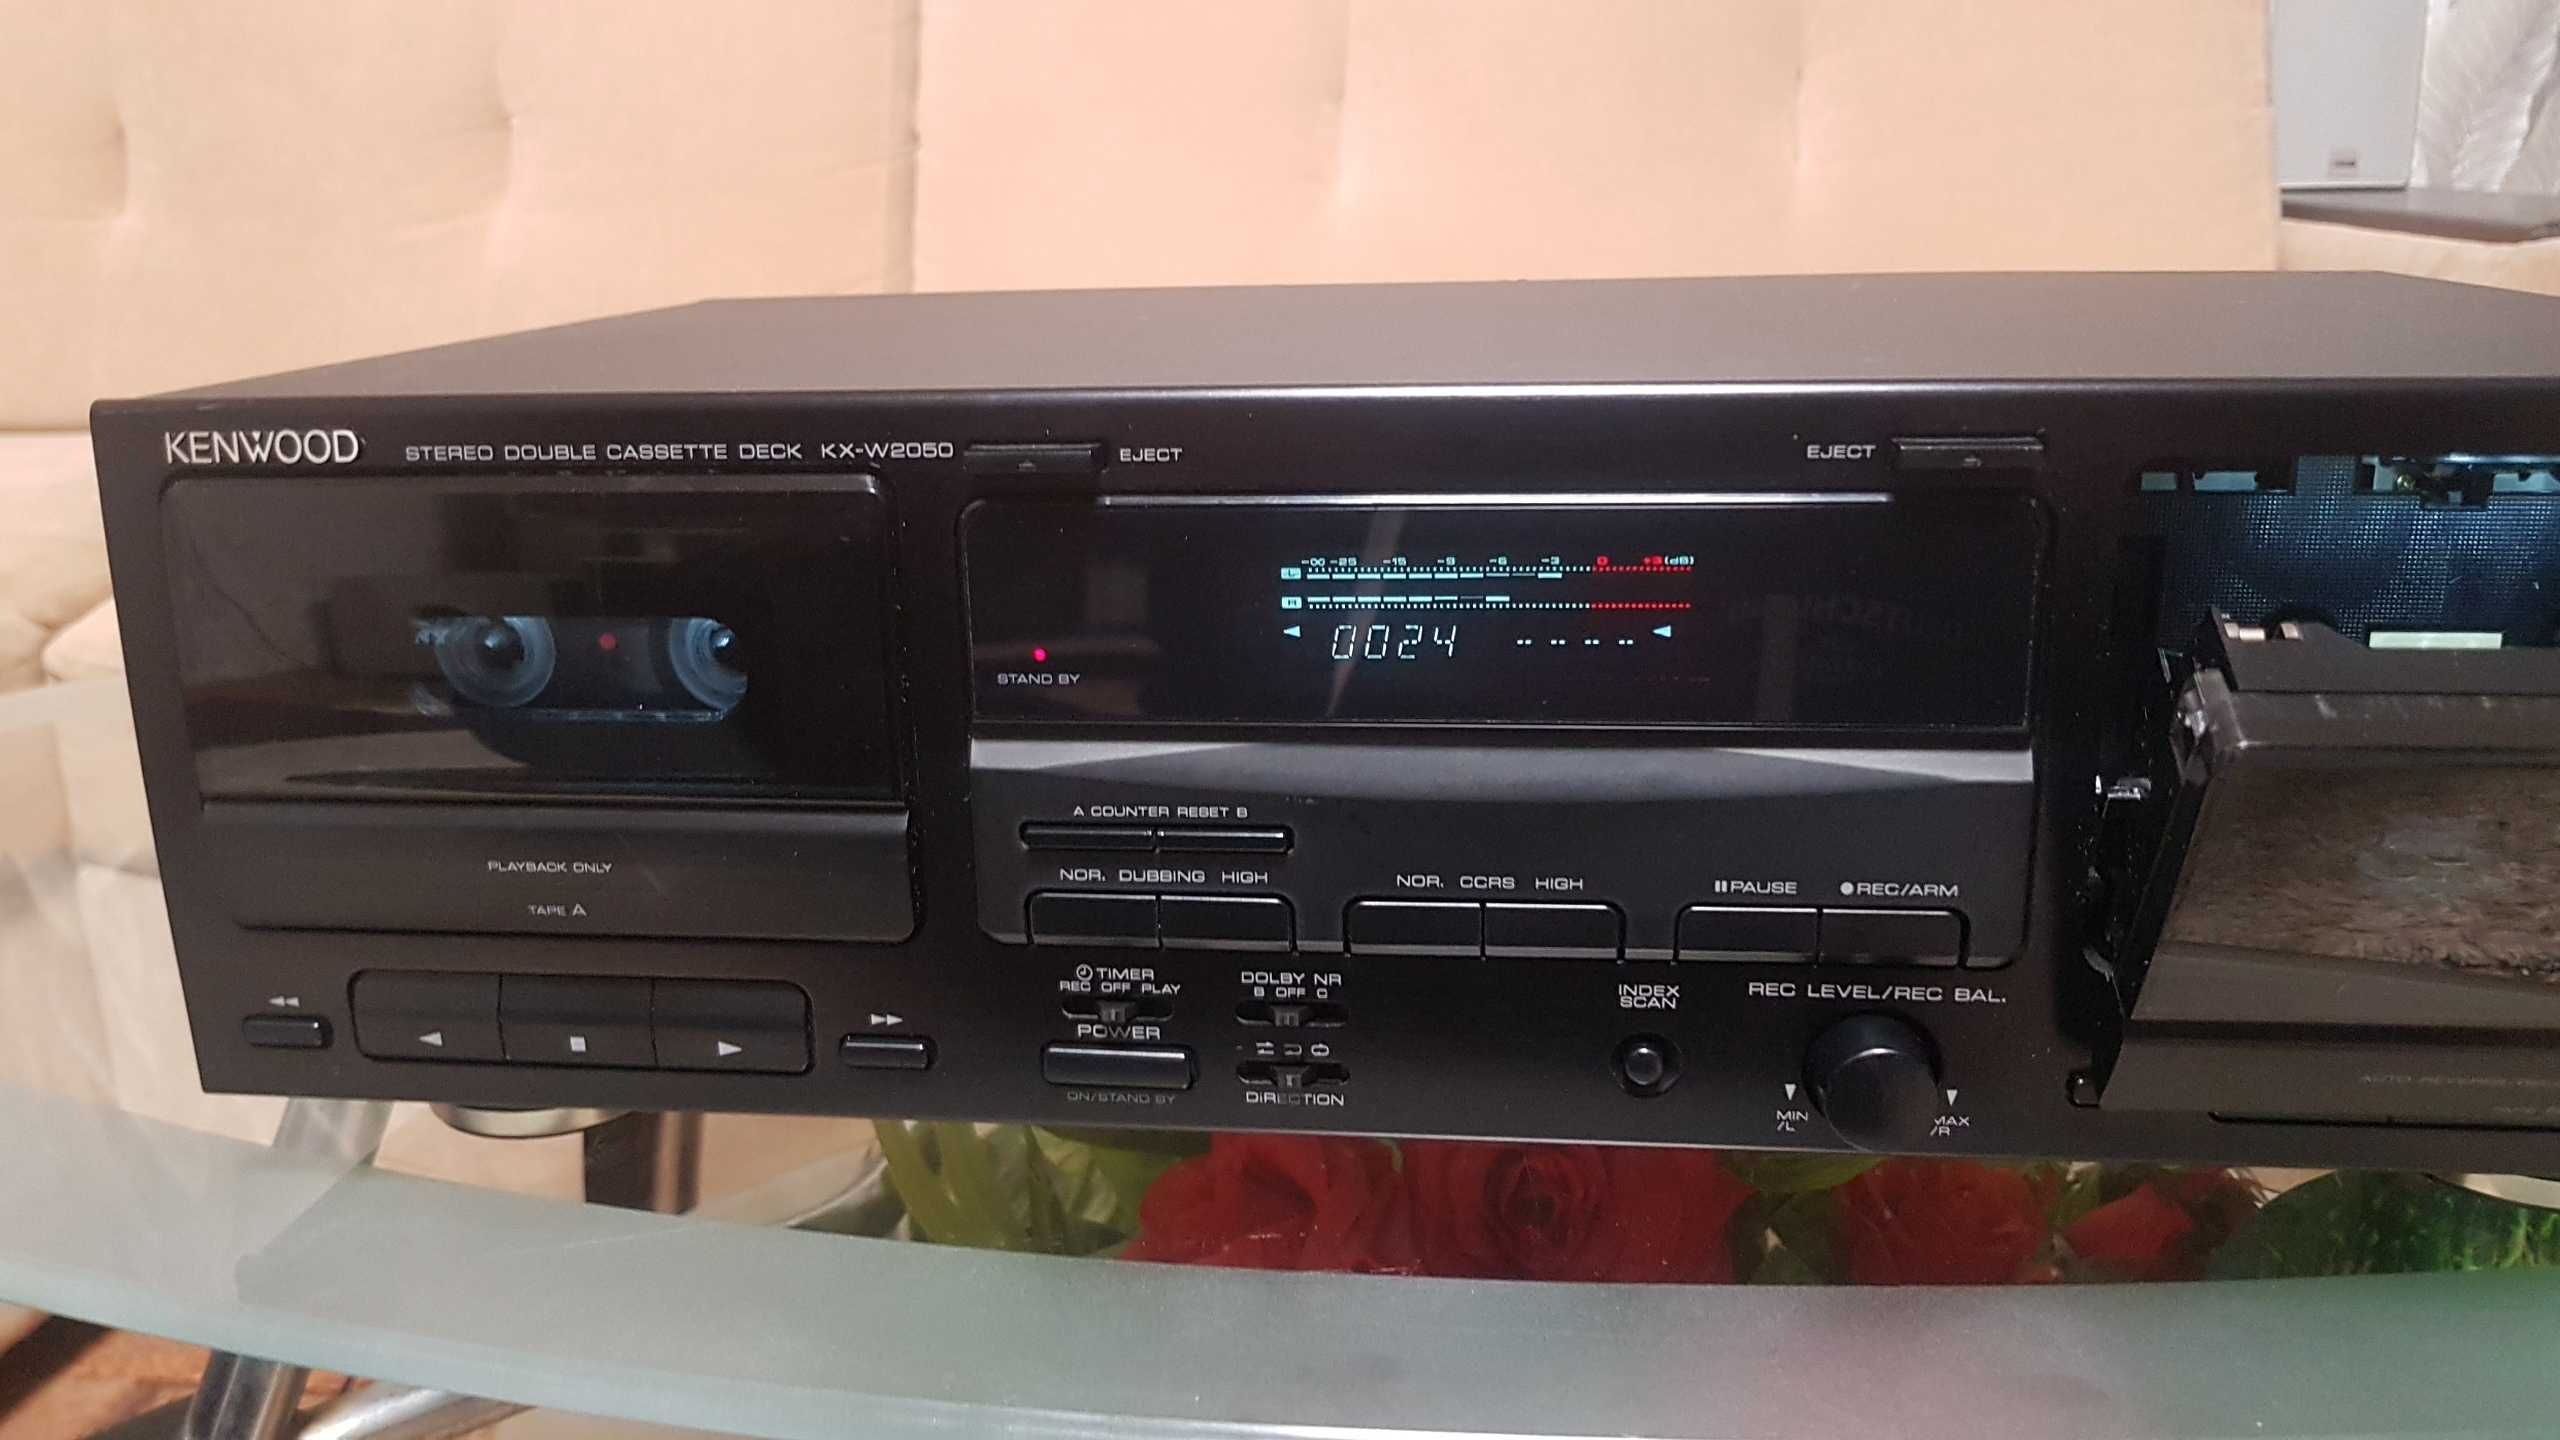 Двухкассетная дека Kenwood KX-W 2050 CCRS made in Japan